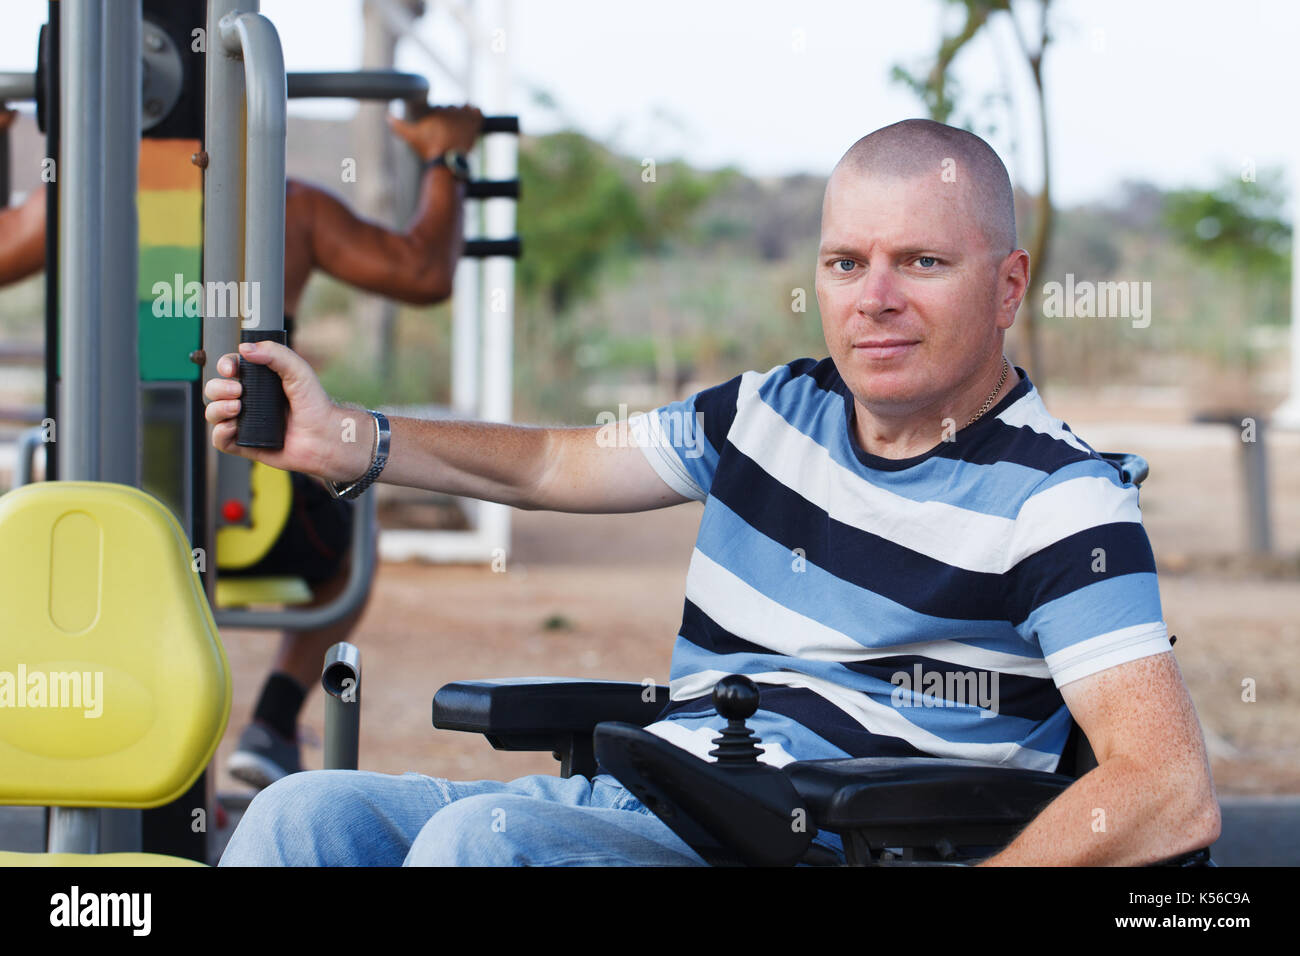 Disabled man working out with trainer. Stock Photo